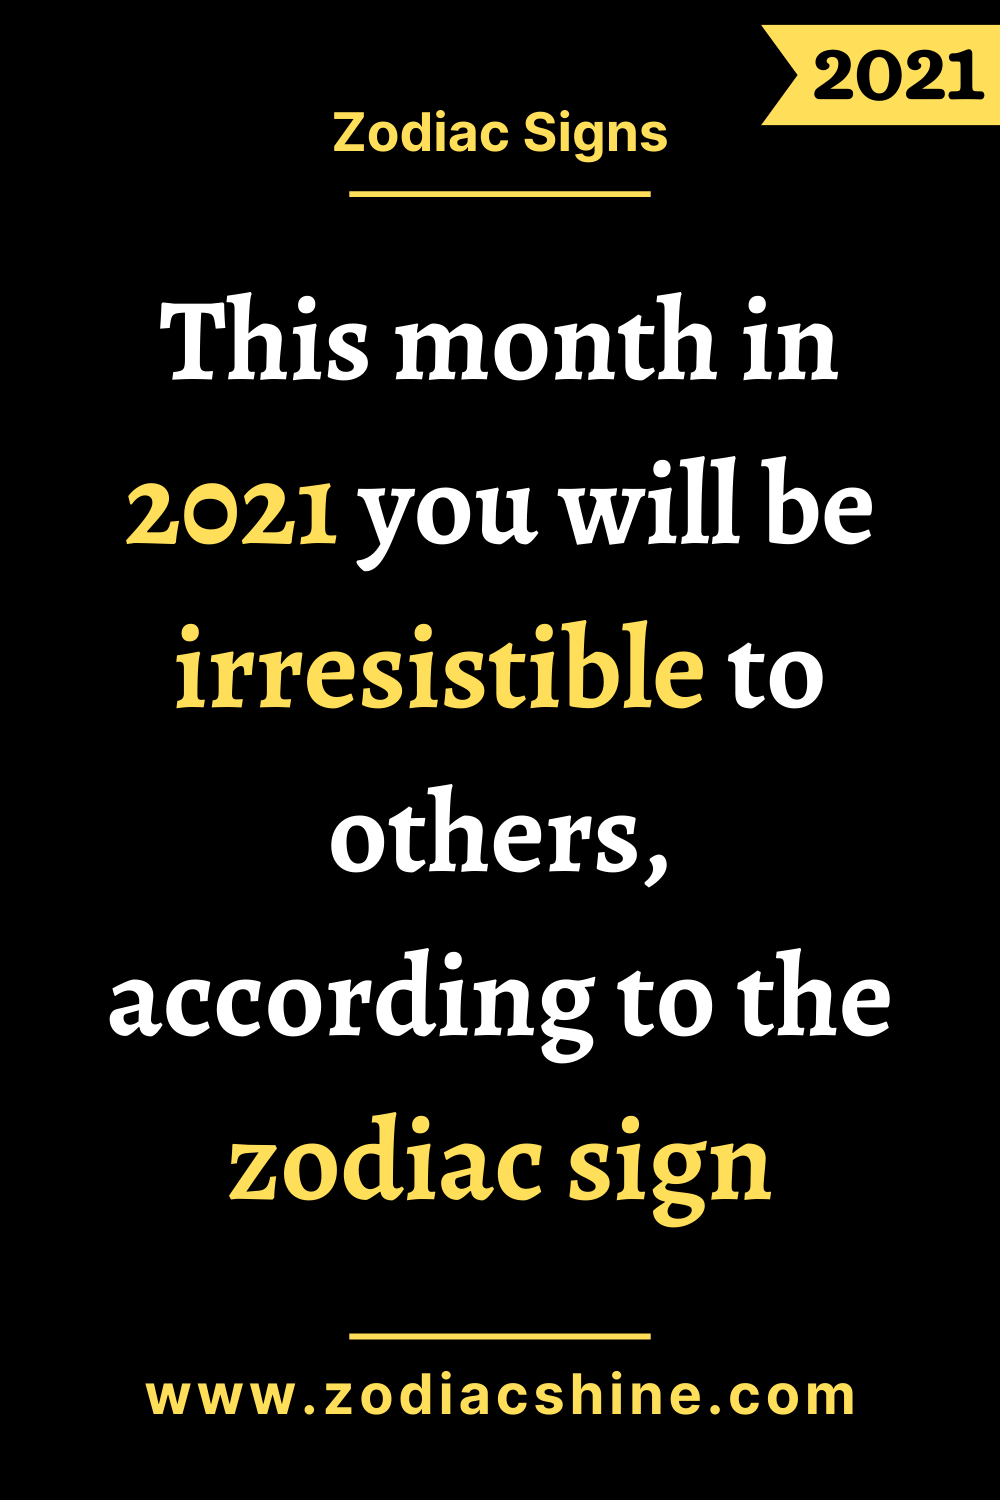 This month in 2021 you will be irresistible to others, according to the zodiac sign